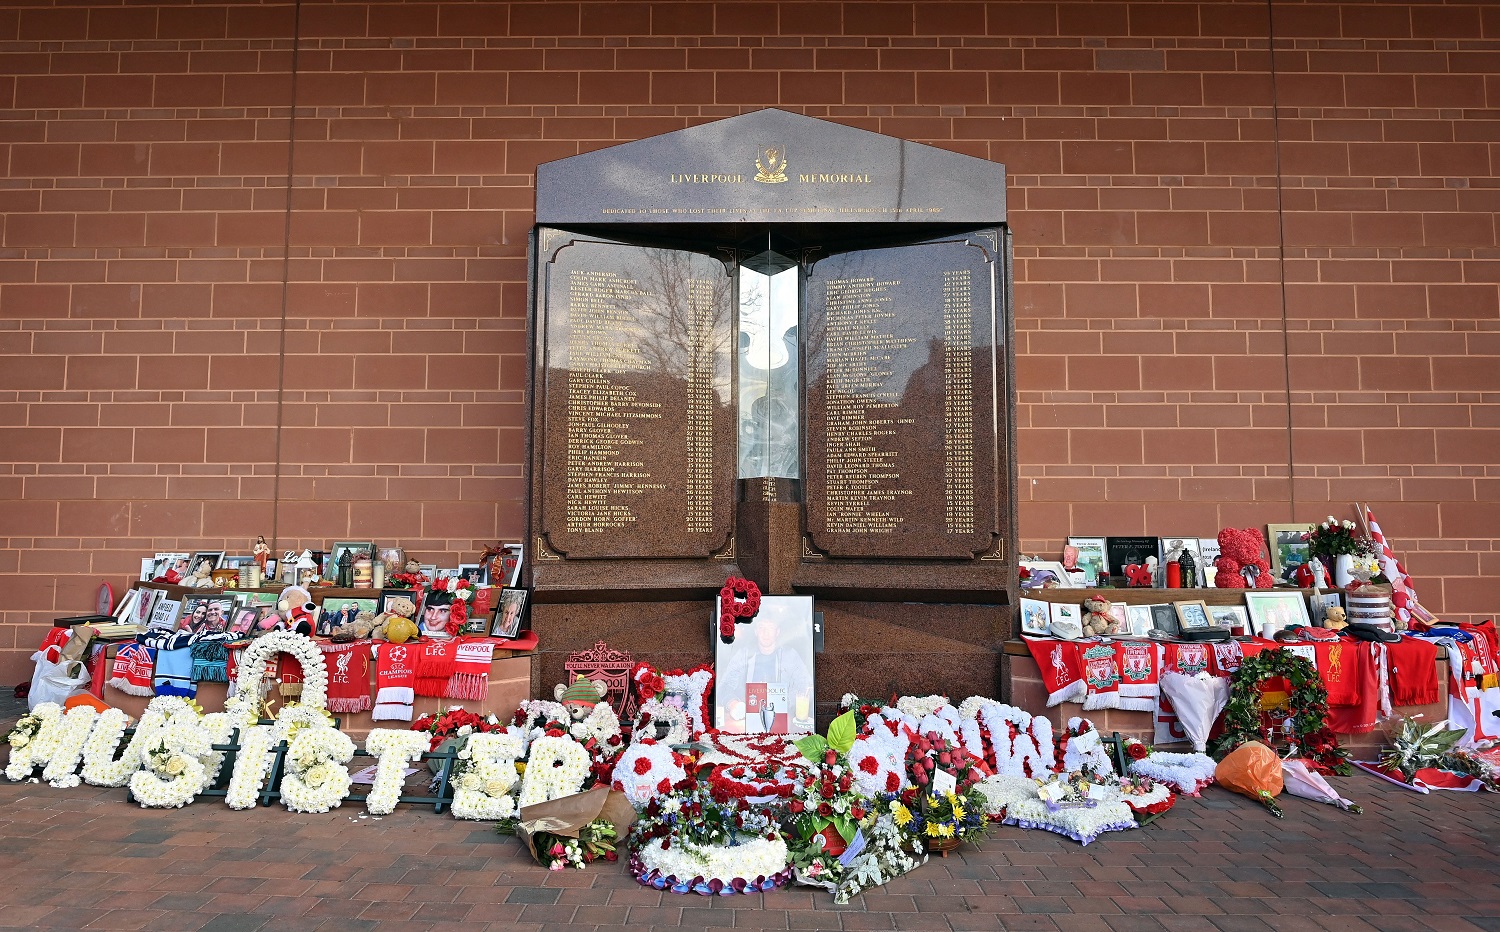 The Hillsborough Stadium Tragedy Killed 96 Soccer Fans, but the Criminal Cases Drag On 32 Years Later